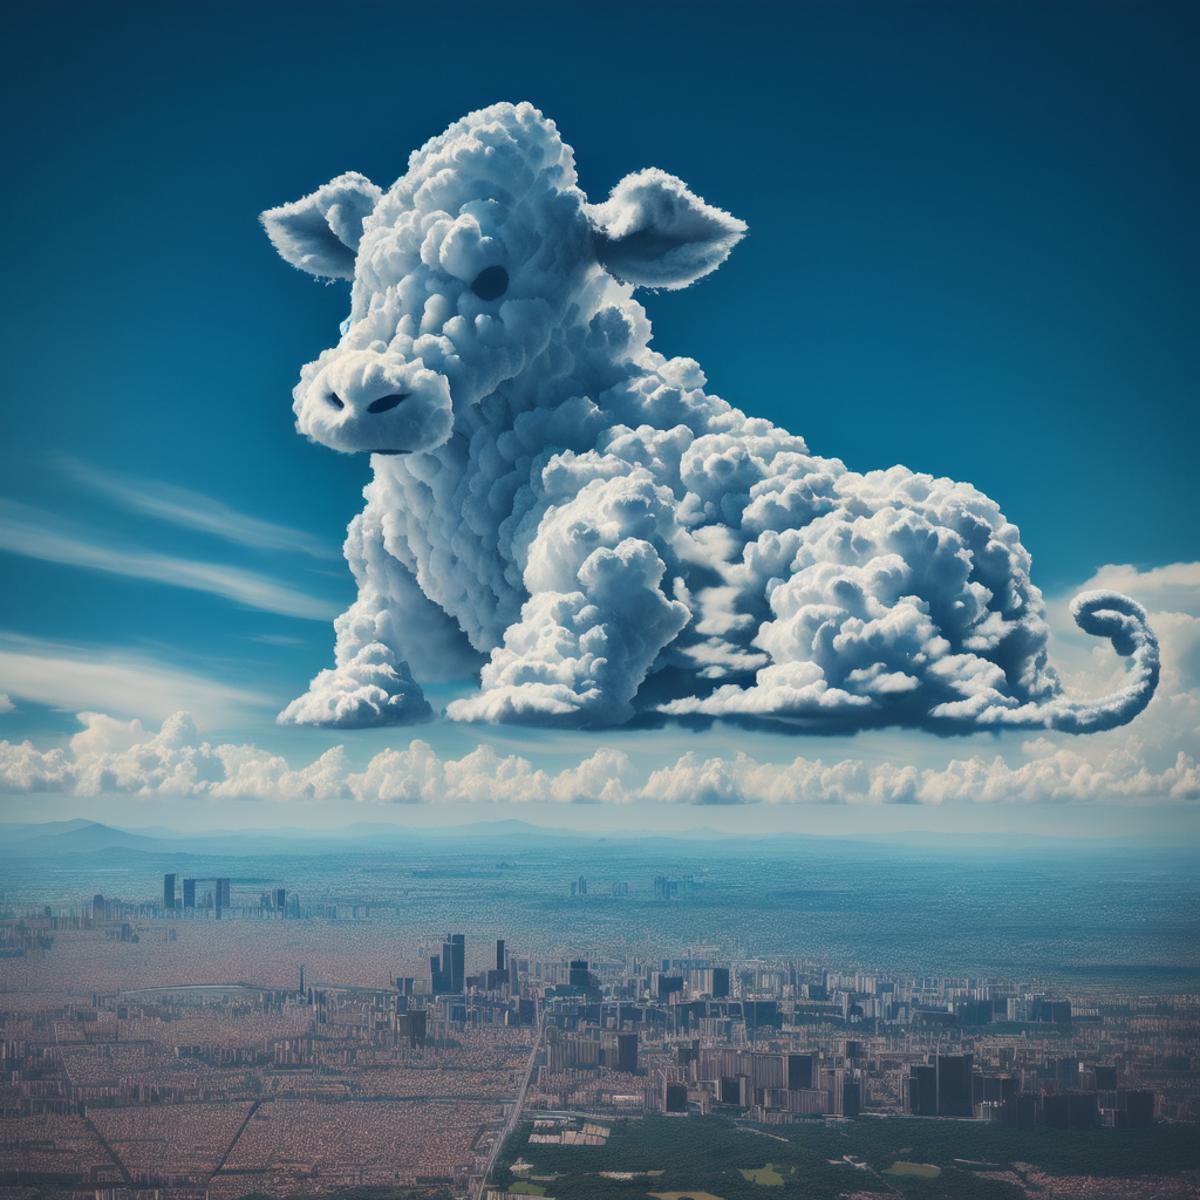 A Cow Flying in the Sky Above a Large City